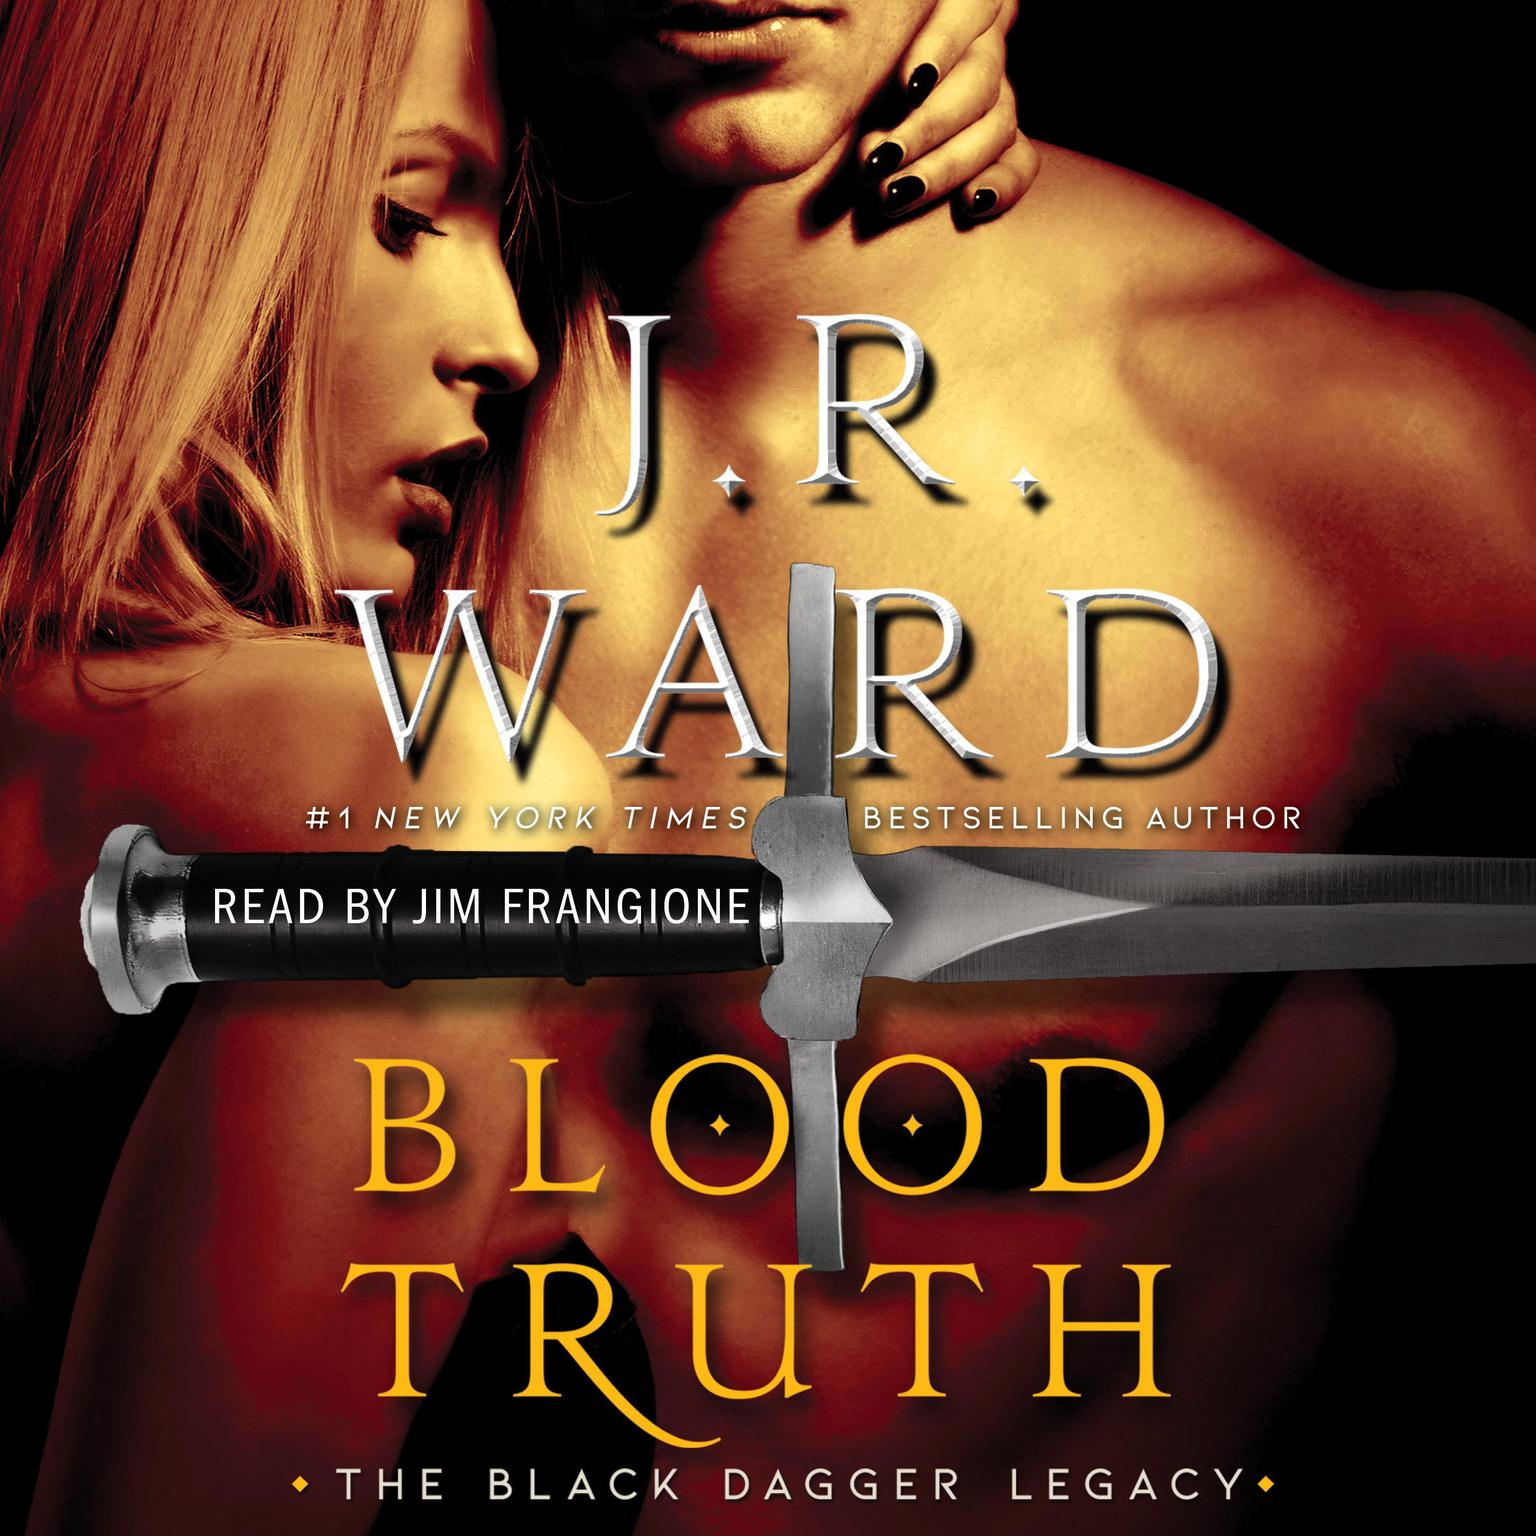 Blood Truth Audiobook, by J. R. Ward